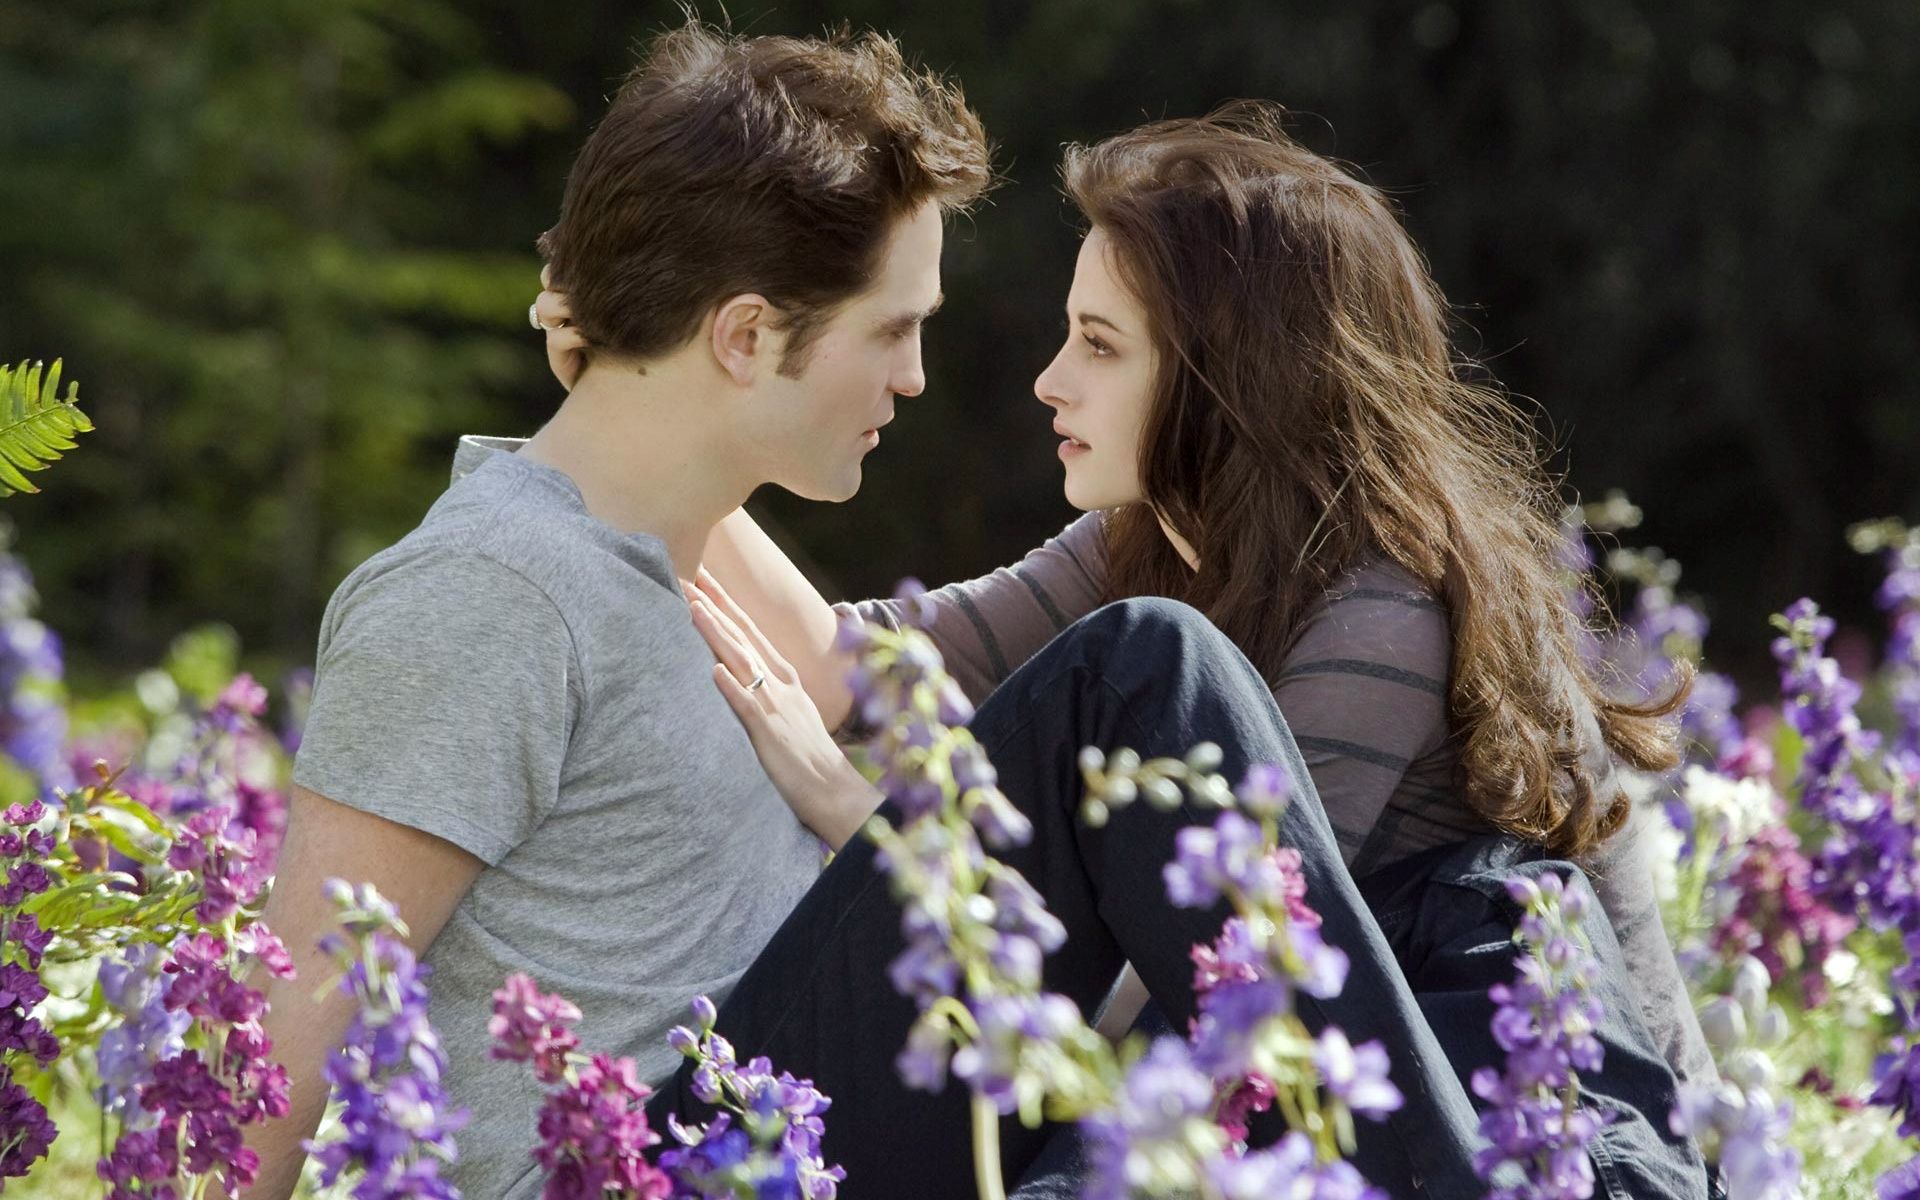 Wallpapers Tagged With TWILIGHT | TWILIGHT HD Wallpapers | Page 1